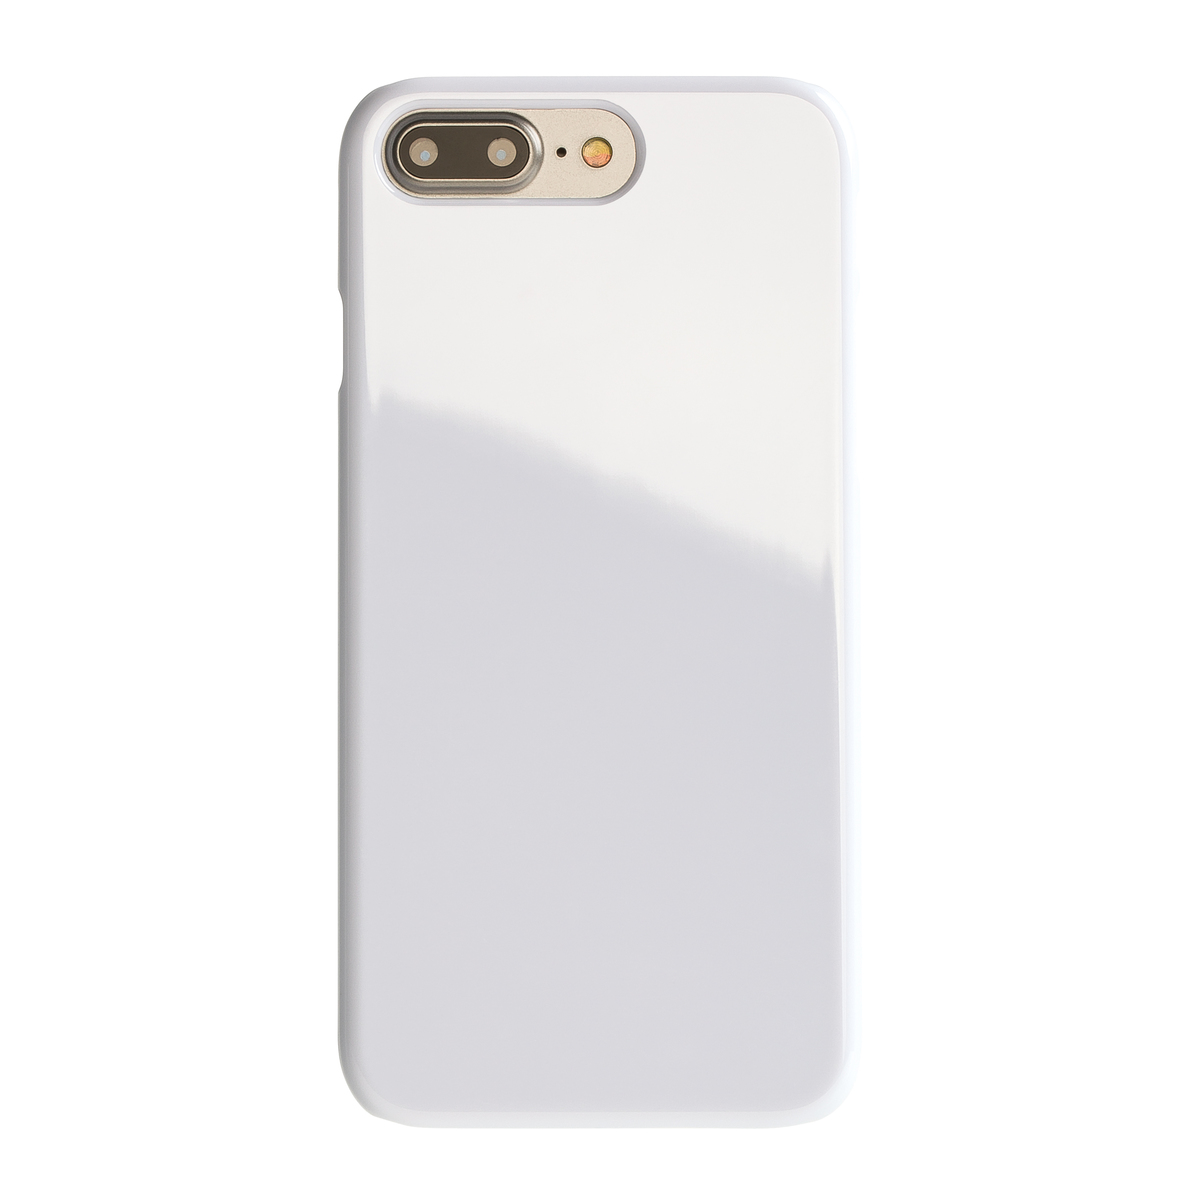 LM Smartphonecover REFLECTS-COVER XI IPhone 7 WHITE weiß